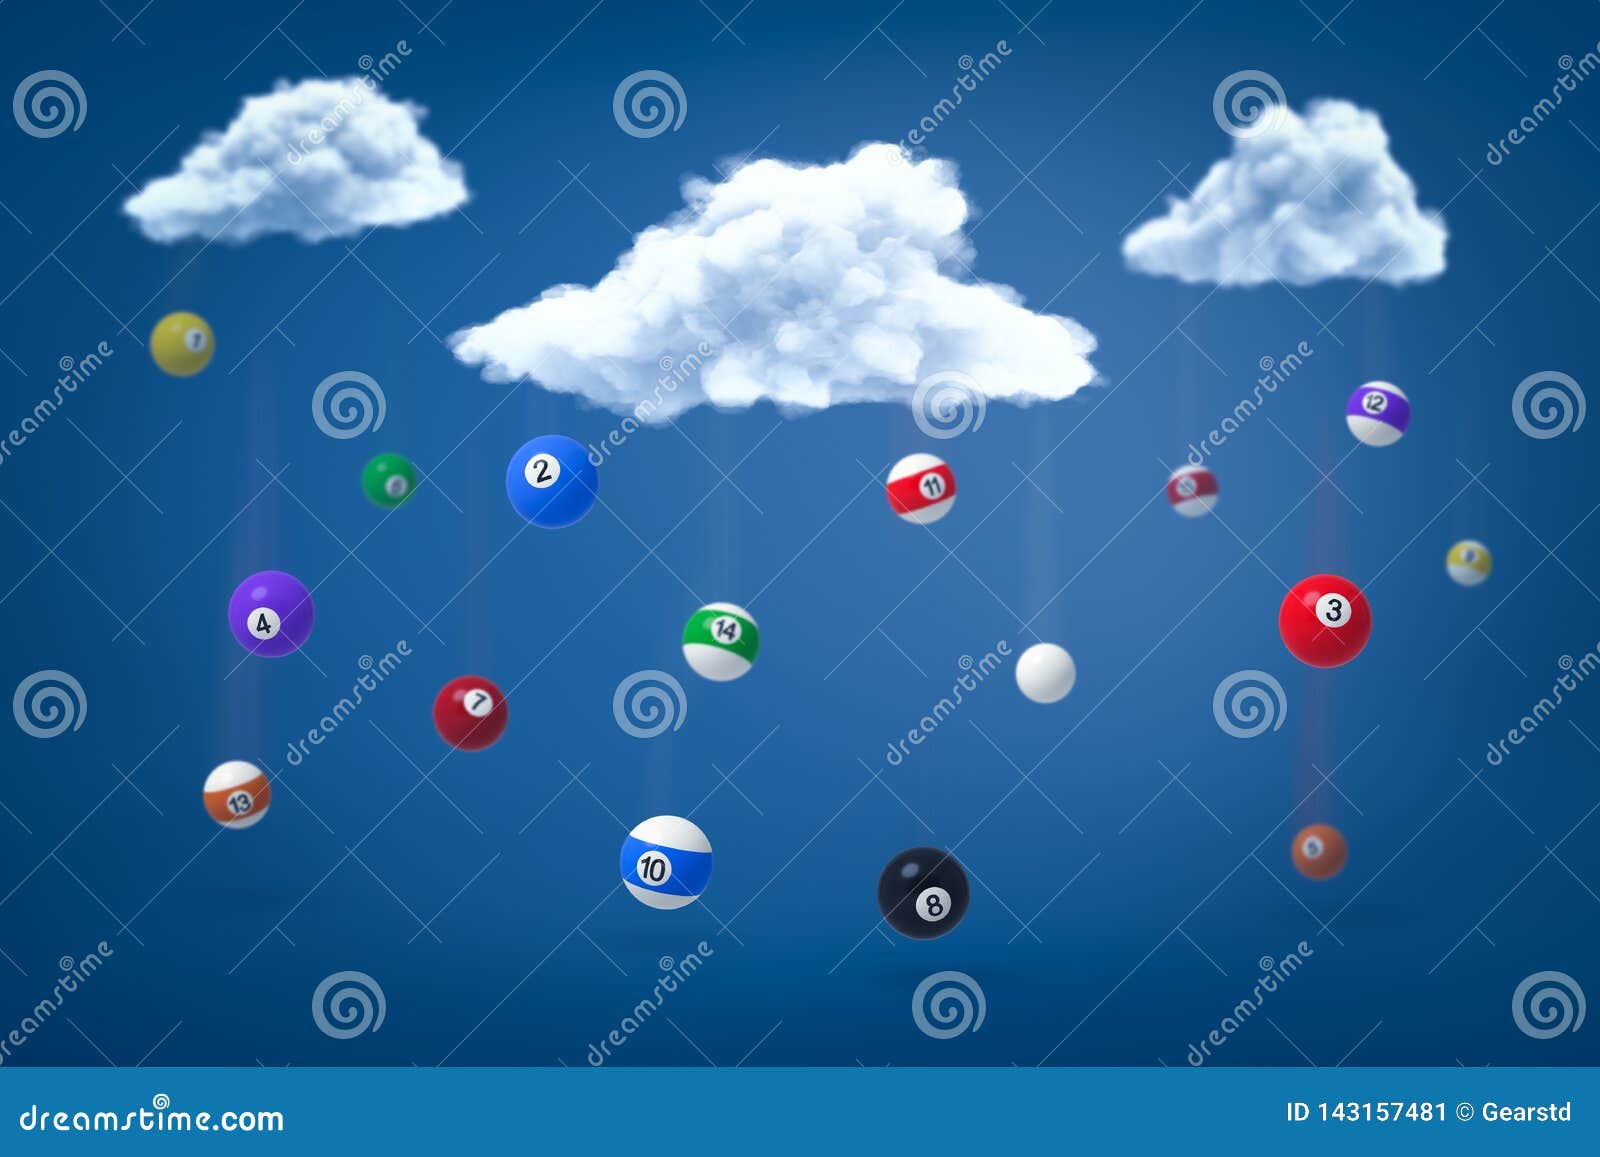 3d Rendering of Snooker Balls Falling Down from Three White Fluffy Clouds in the Blue Sky